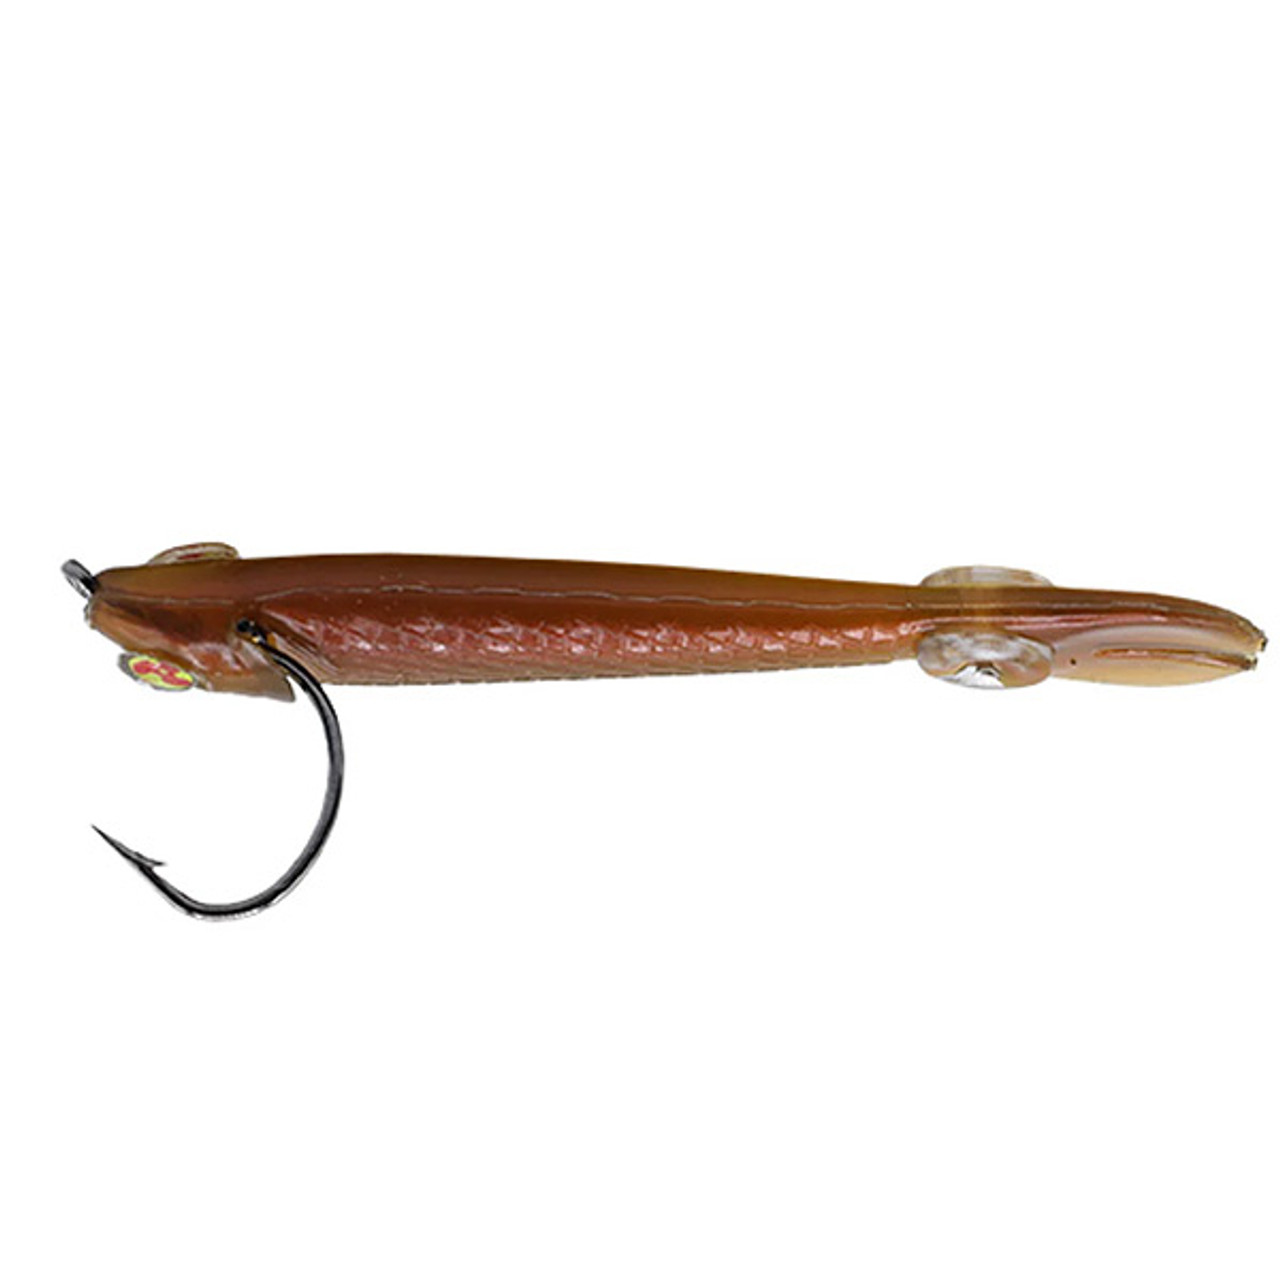 Recoil Minnow 5.25" Bait - Rigged